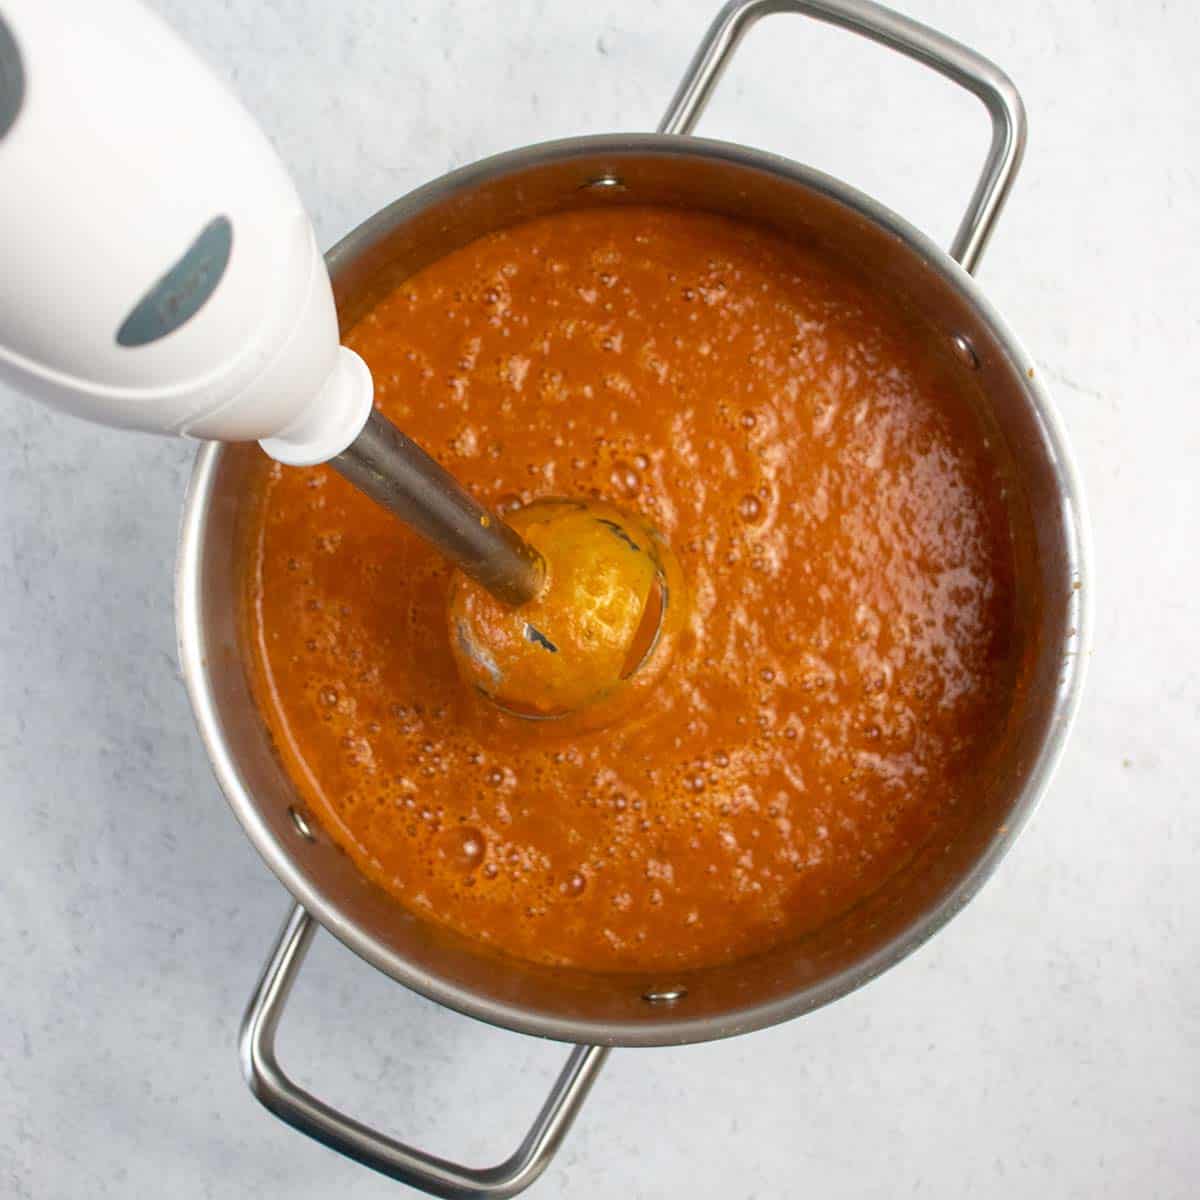 Vegan tomato soup being puréed with an immersion blender.